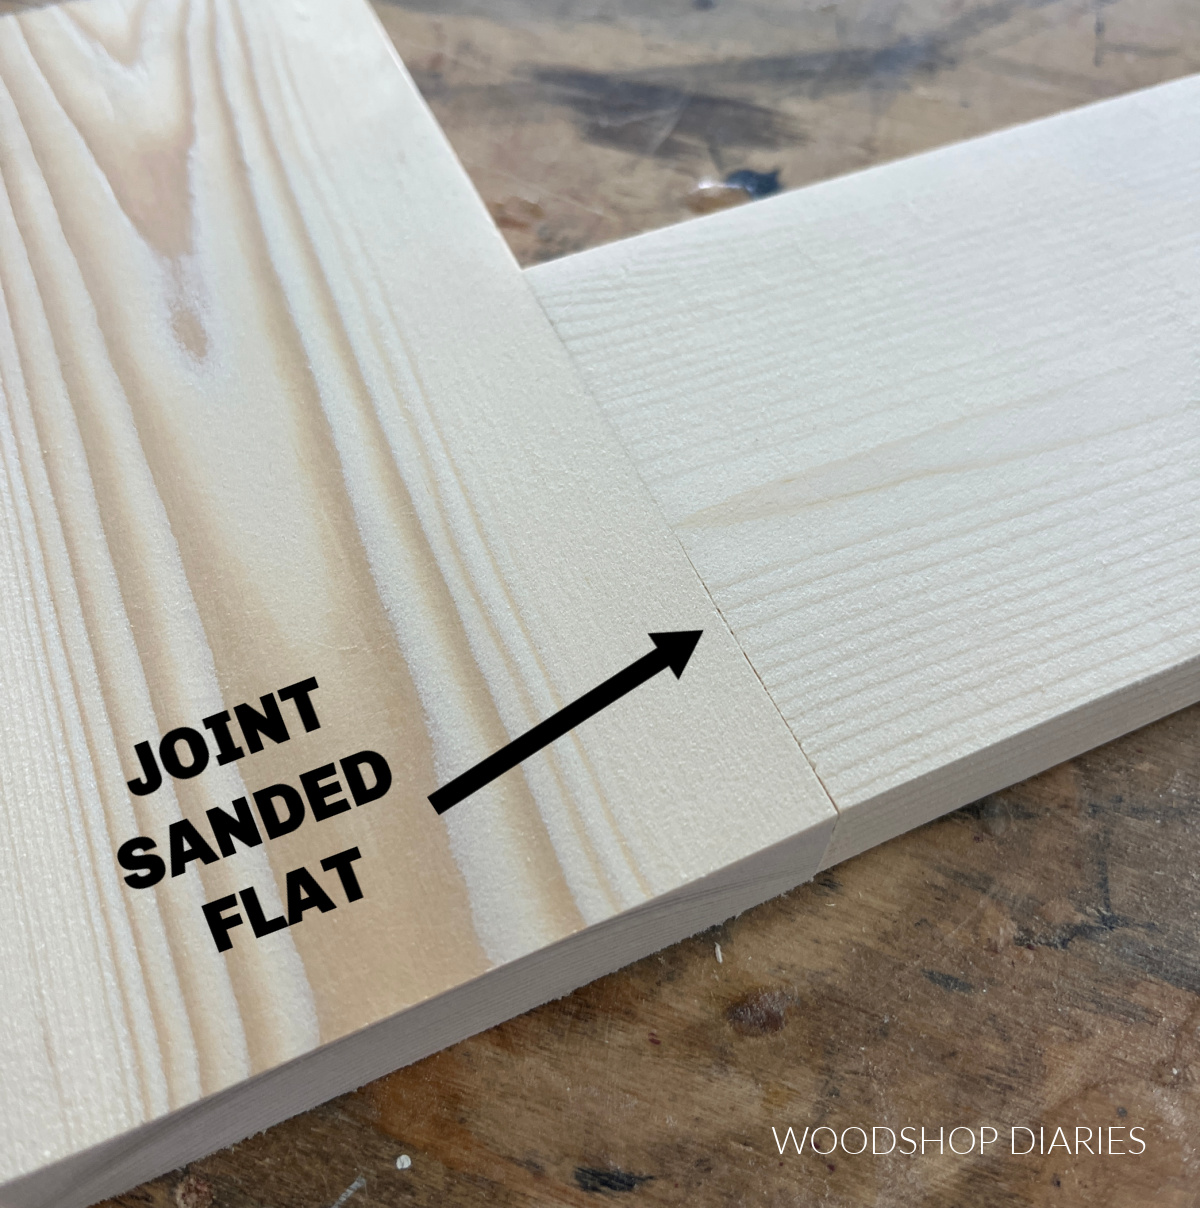 close up image showing a wood joint sanded smooth and flat